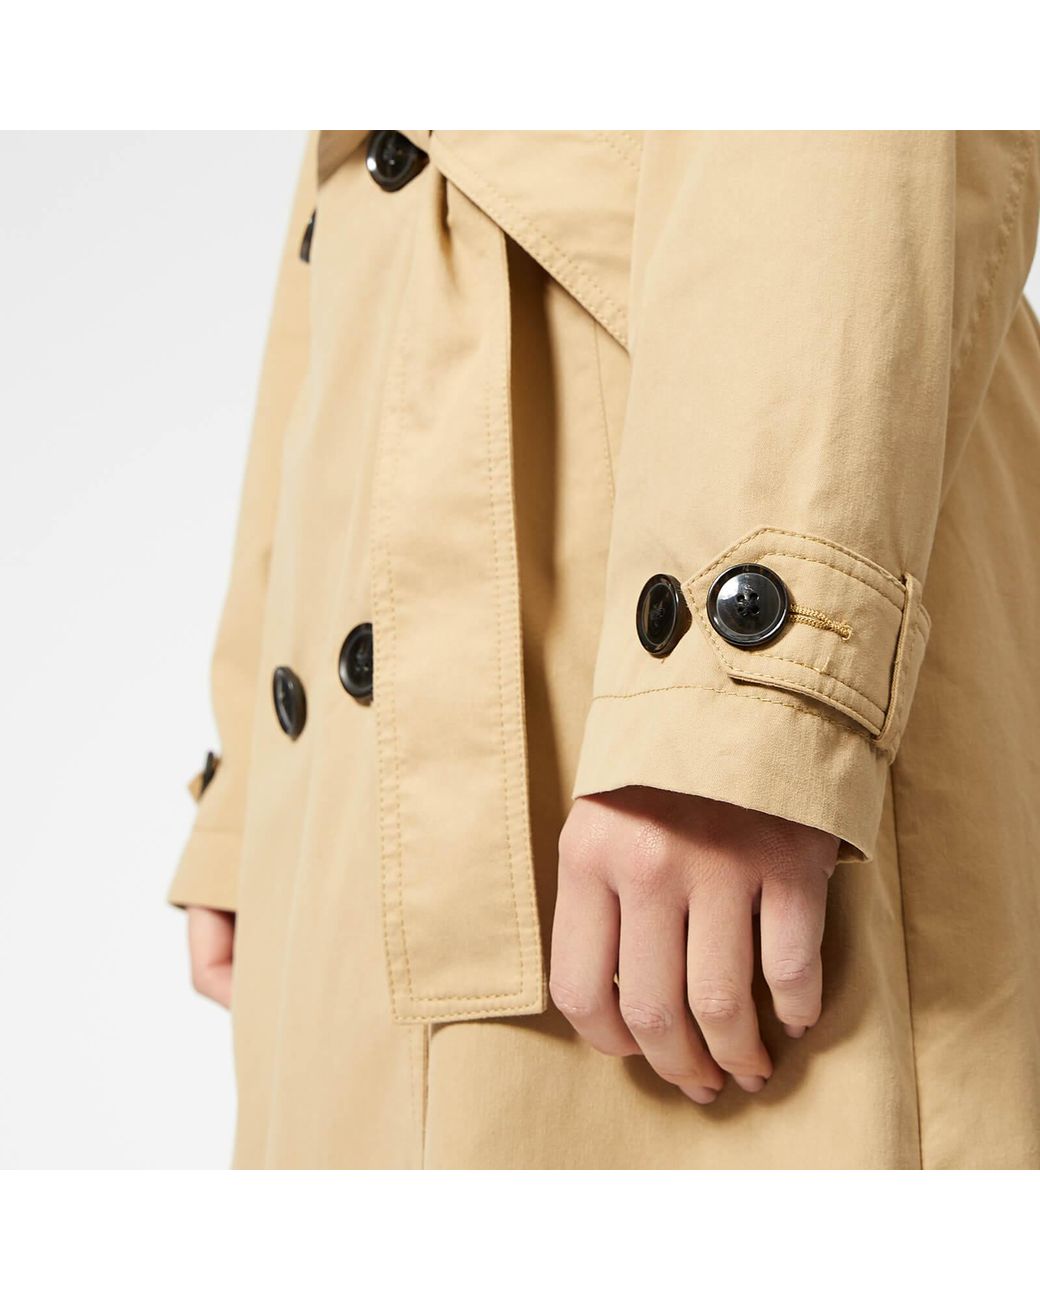 Levi's Kate Trench Coat in Natural | Lyst Australia